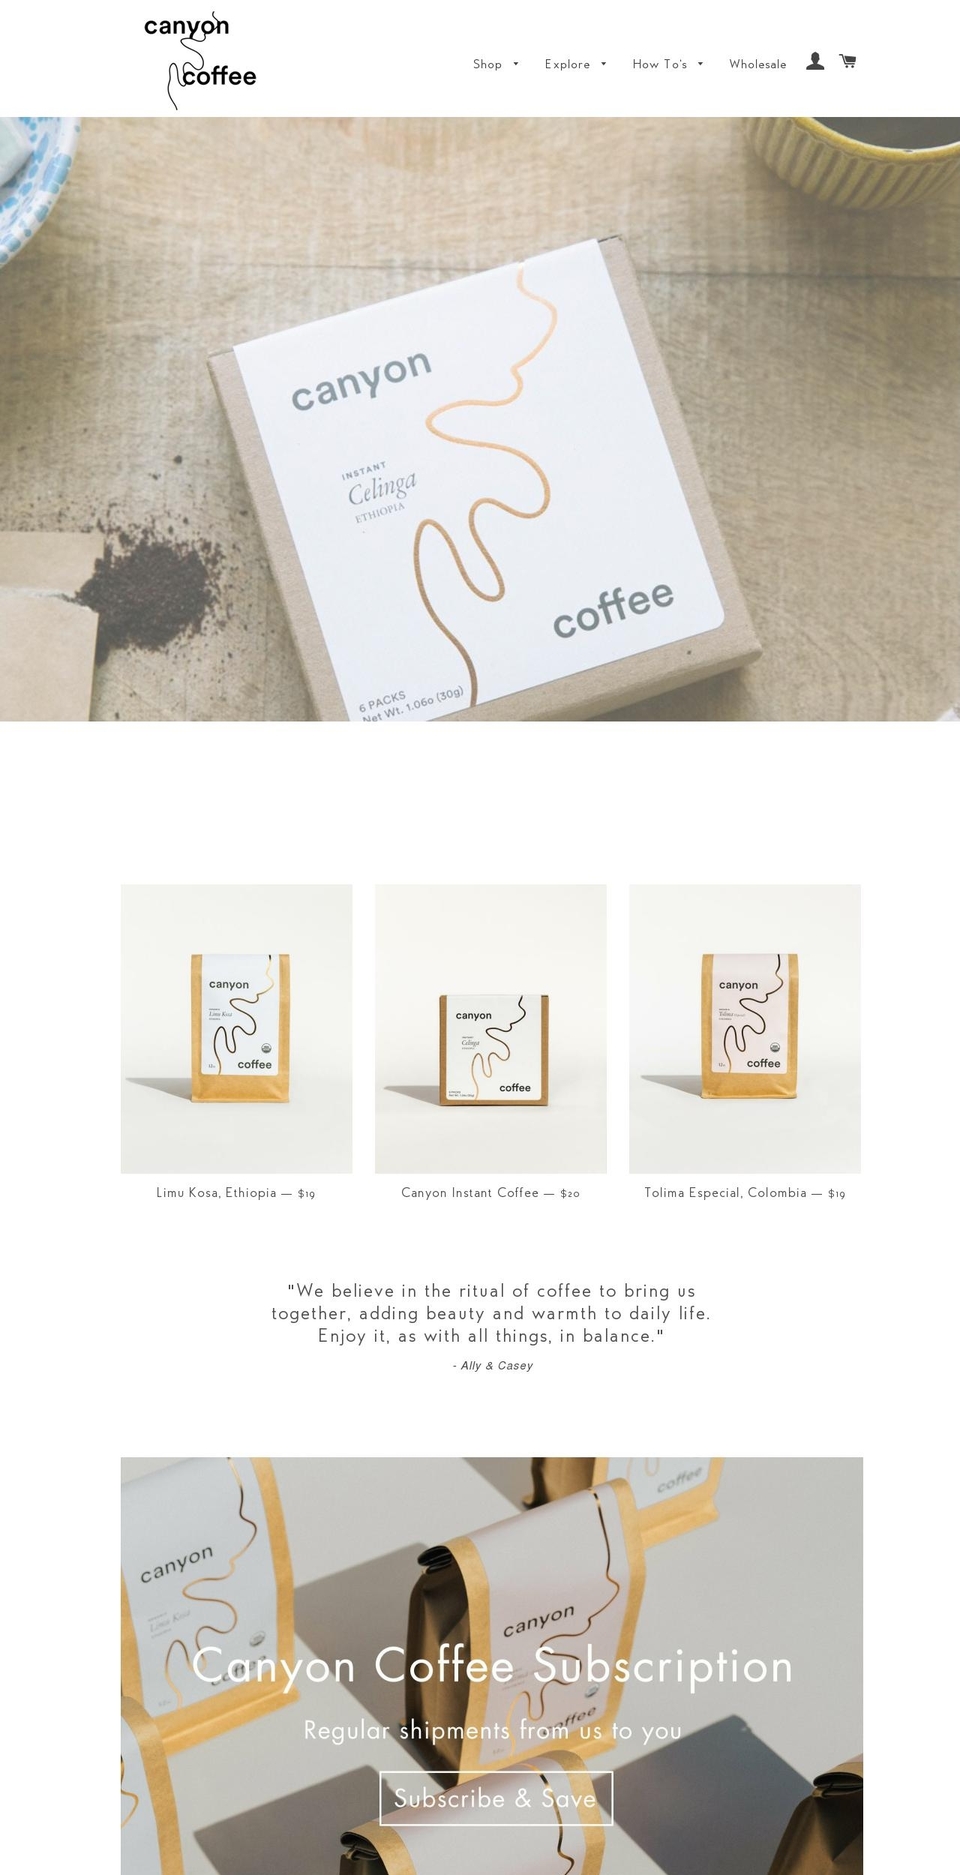 Coffee Shopify theme site example canyoncoffee.co